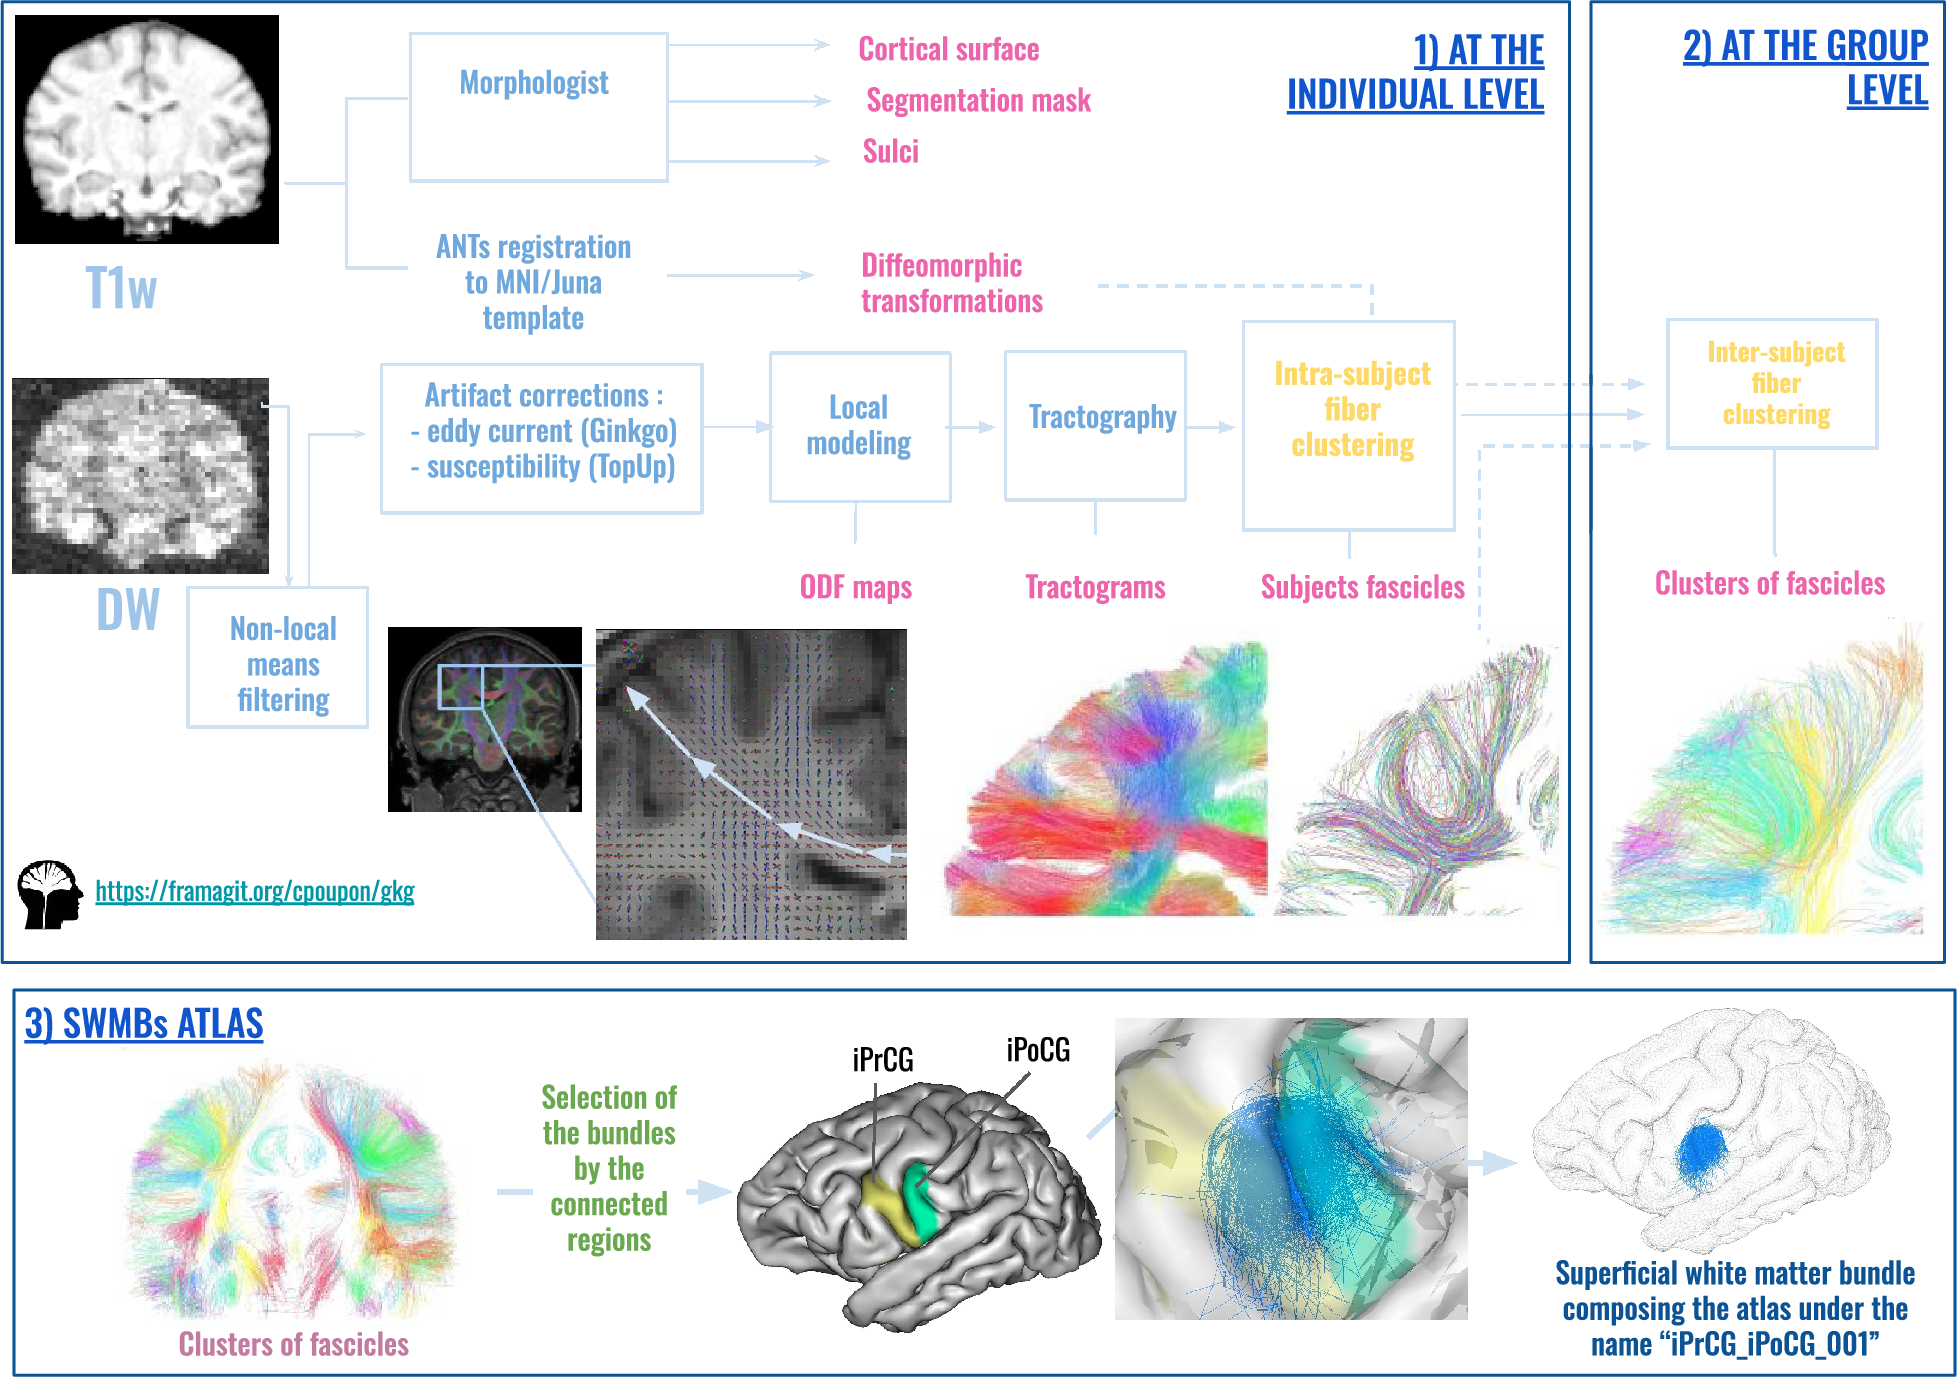 Comparative analysis of the chimpanzee and human brain superficial structural connectivities